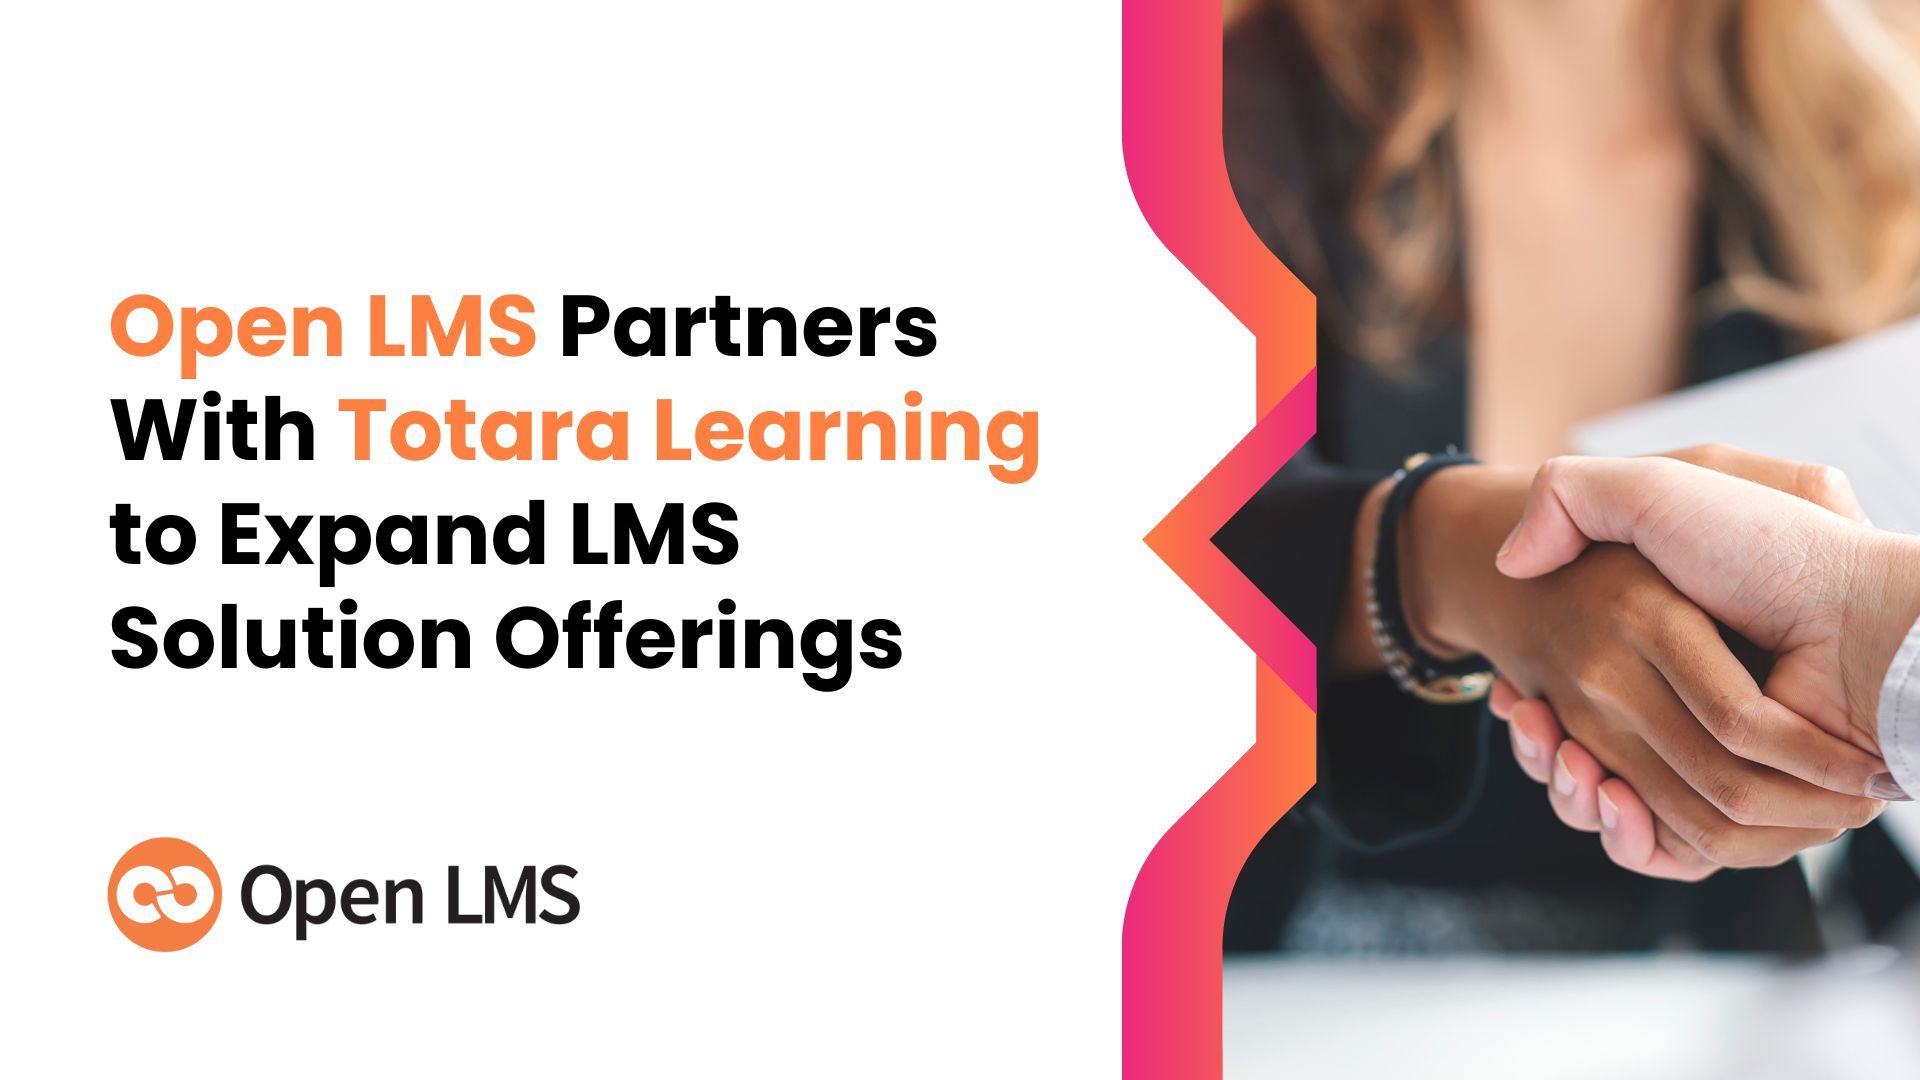 Open LMS is now an official Totara Learning partner